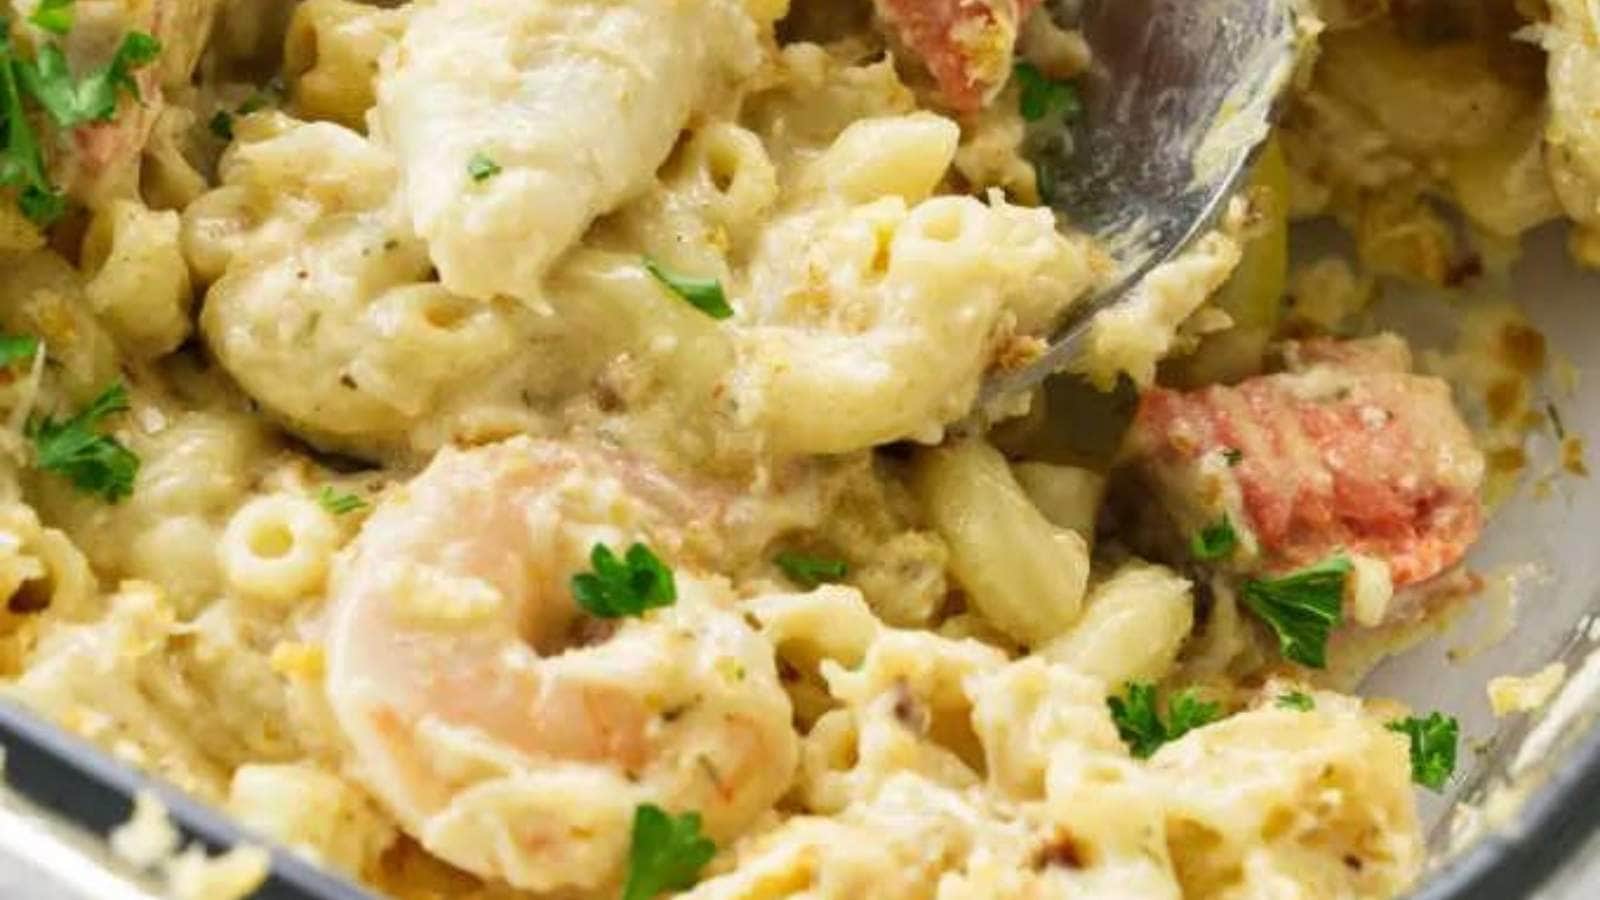 Seafood Mac and Cheese recipe by Savor The Best.